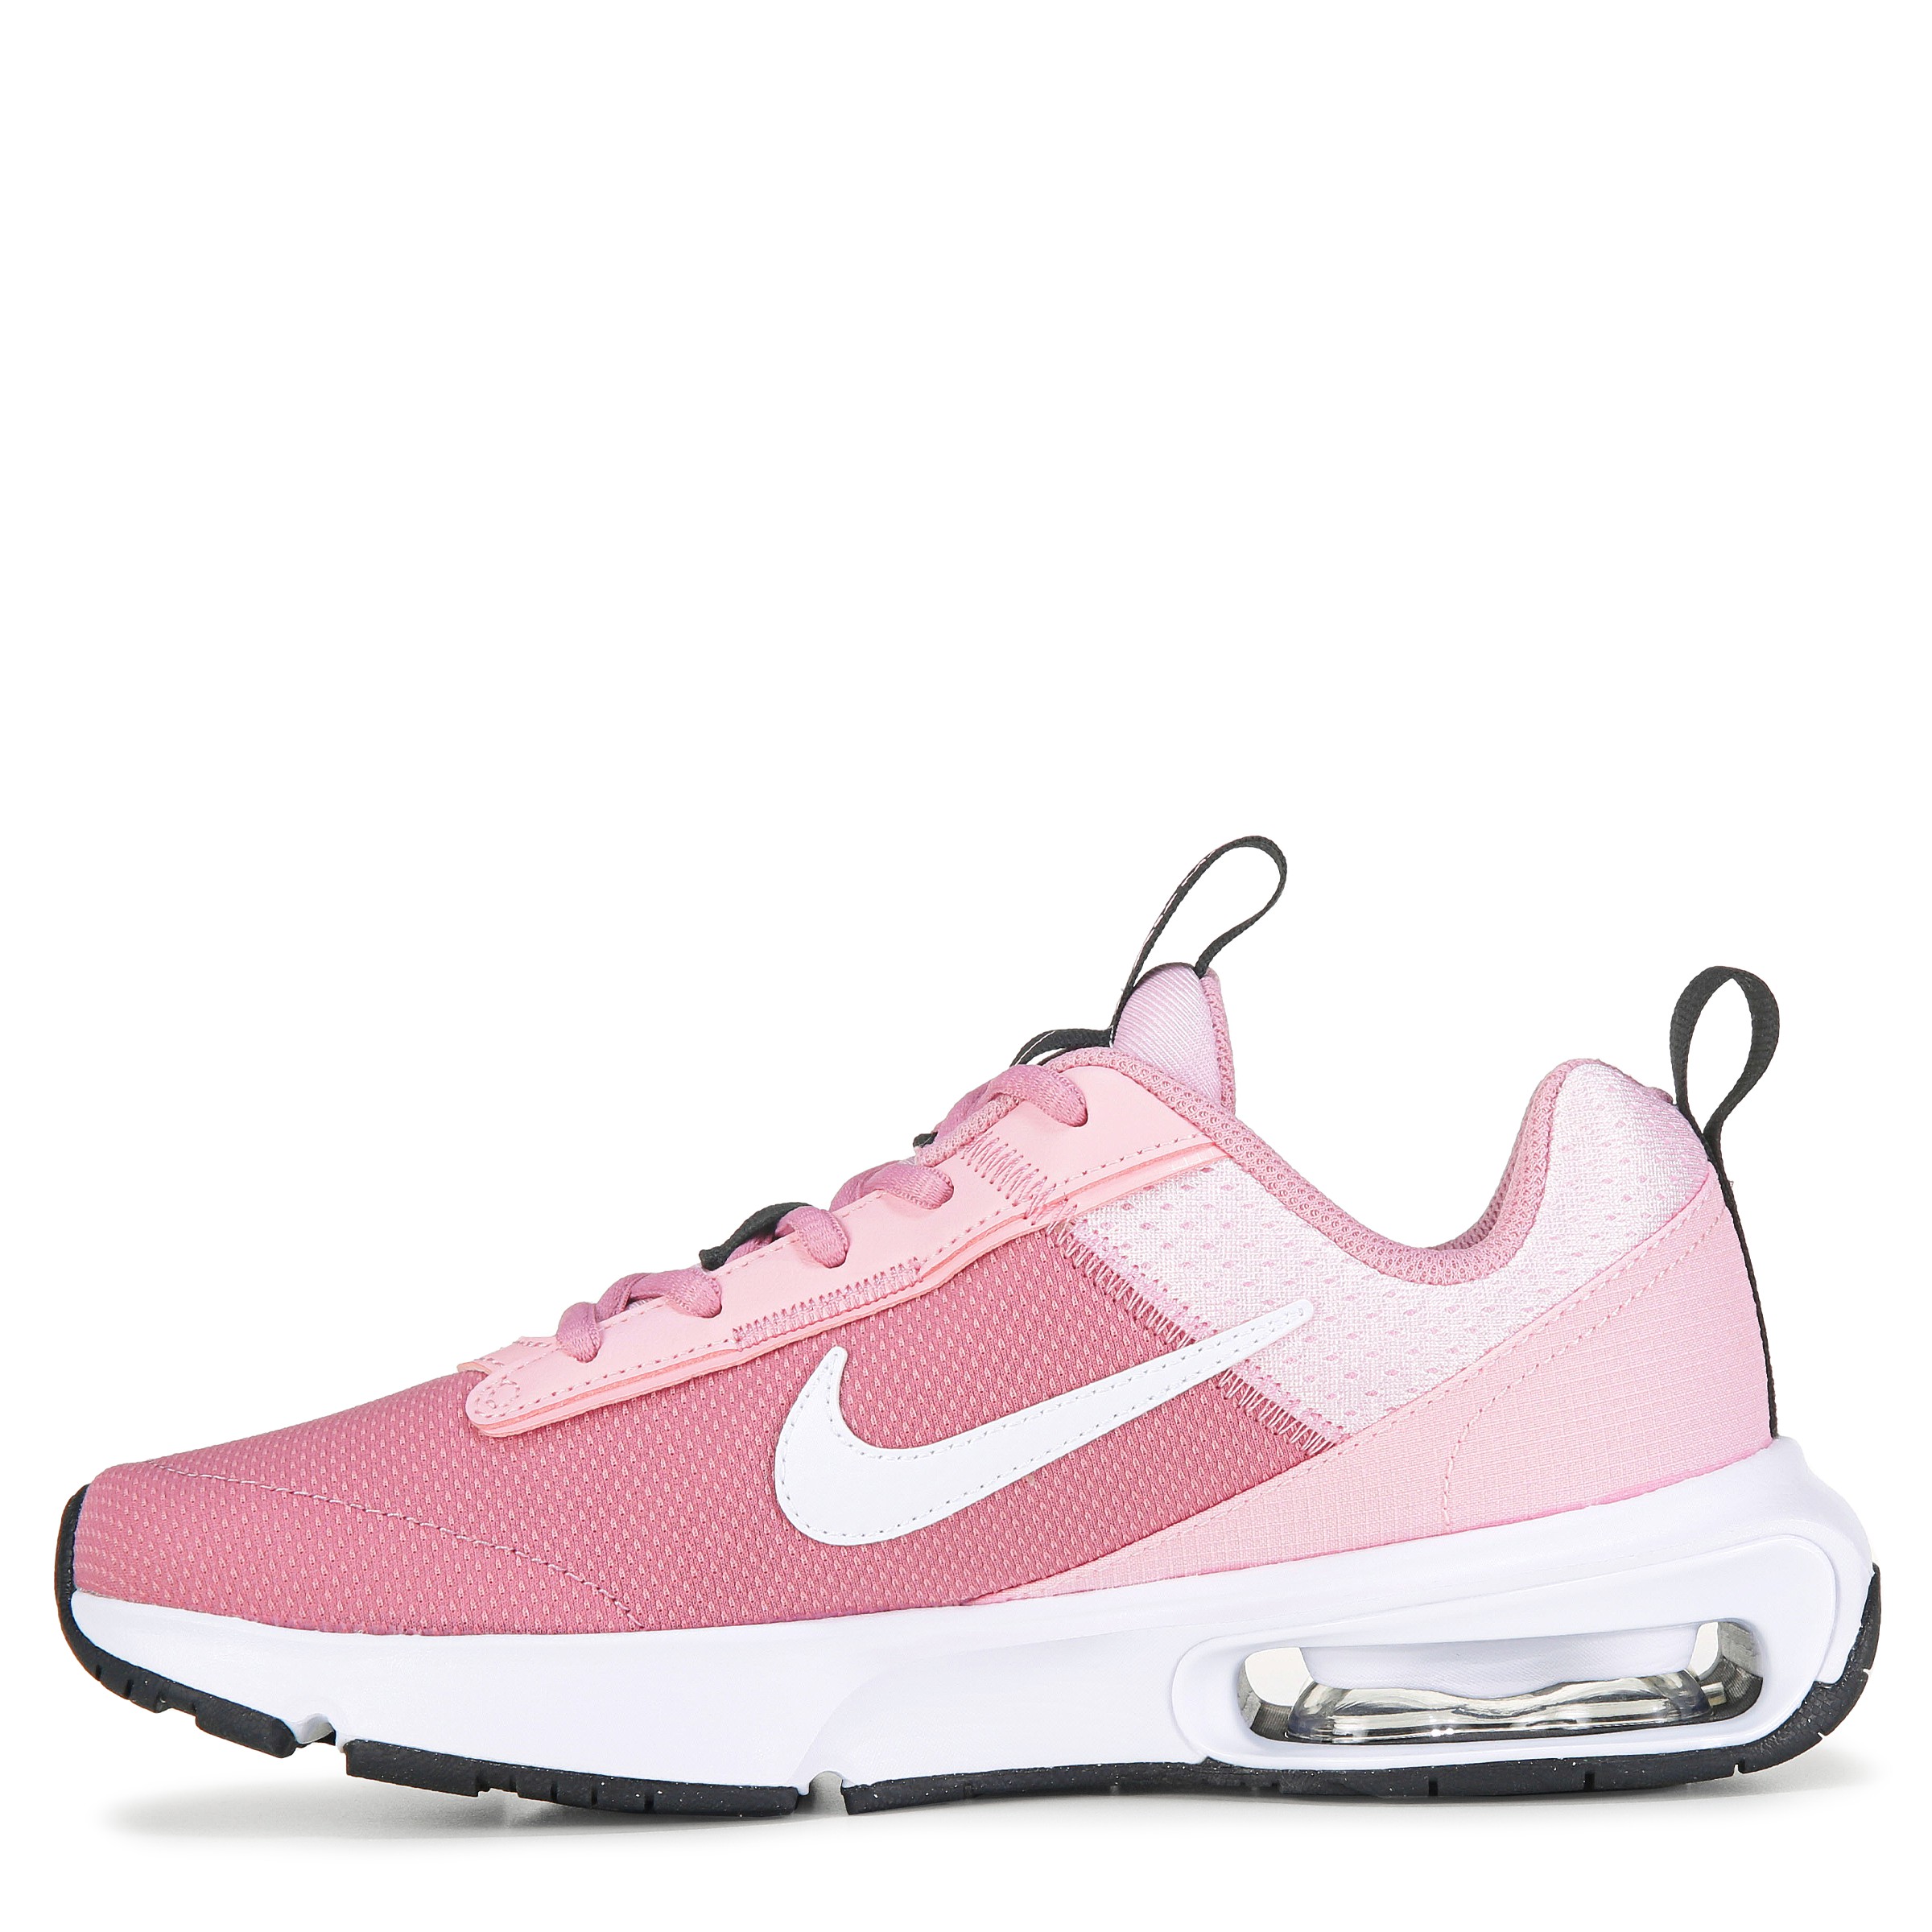 Nike Air Max Pre-Day Women's Shoes